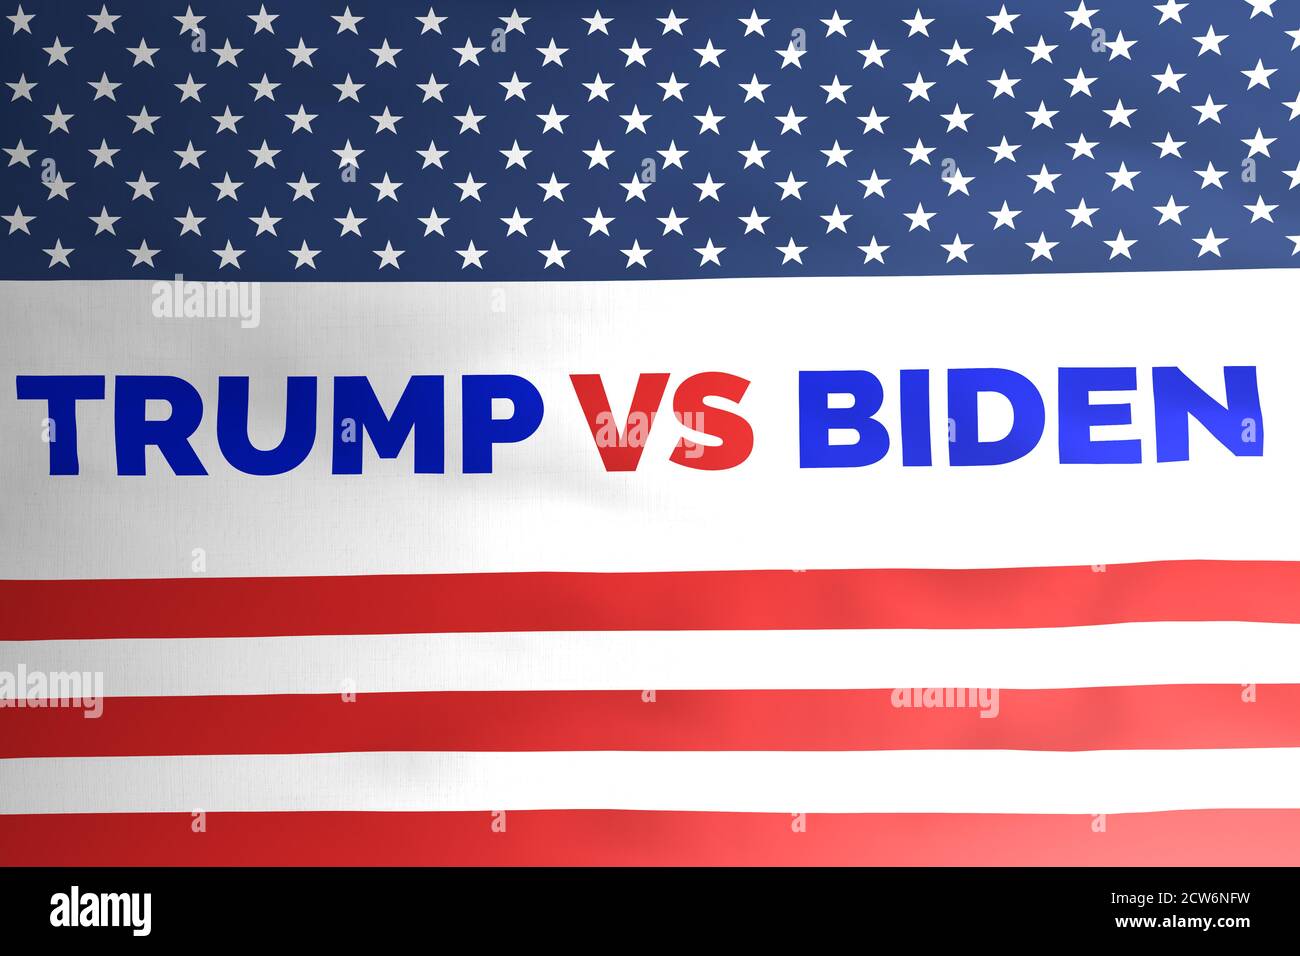 Trump Vs Biden on american flag illustration, two candidates for president election 2020, republican and democratic party concept. Editorial. Stock Photo